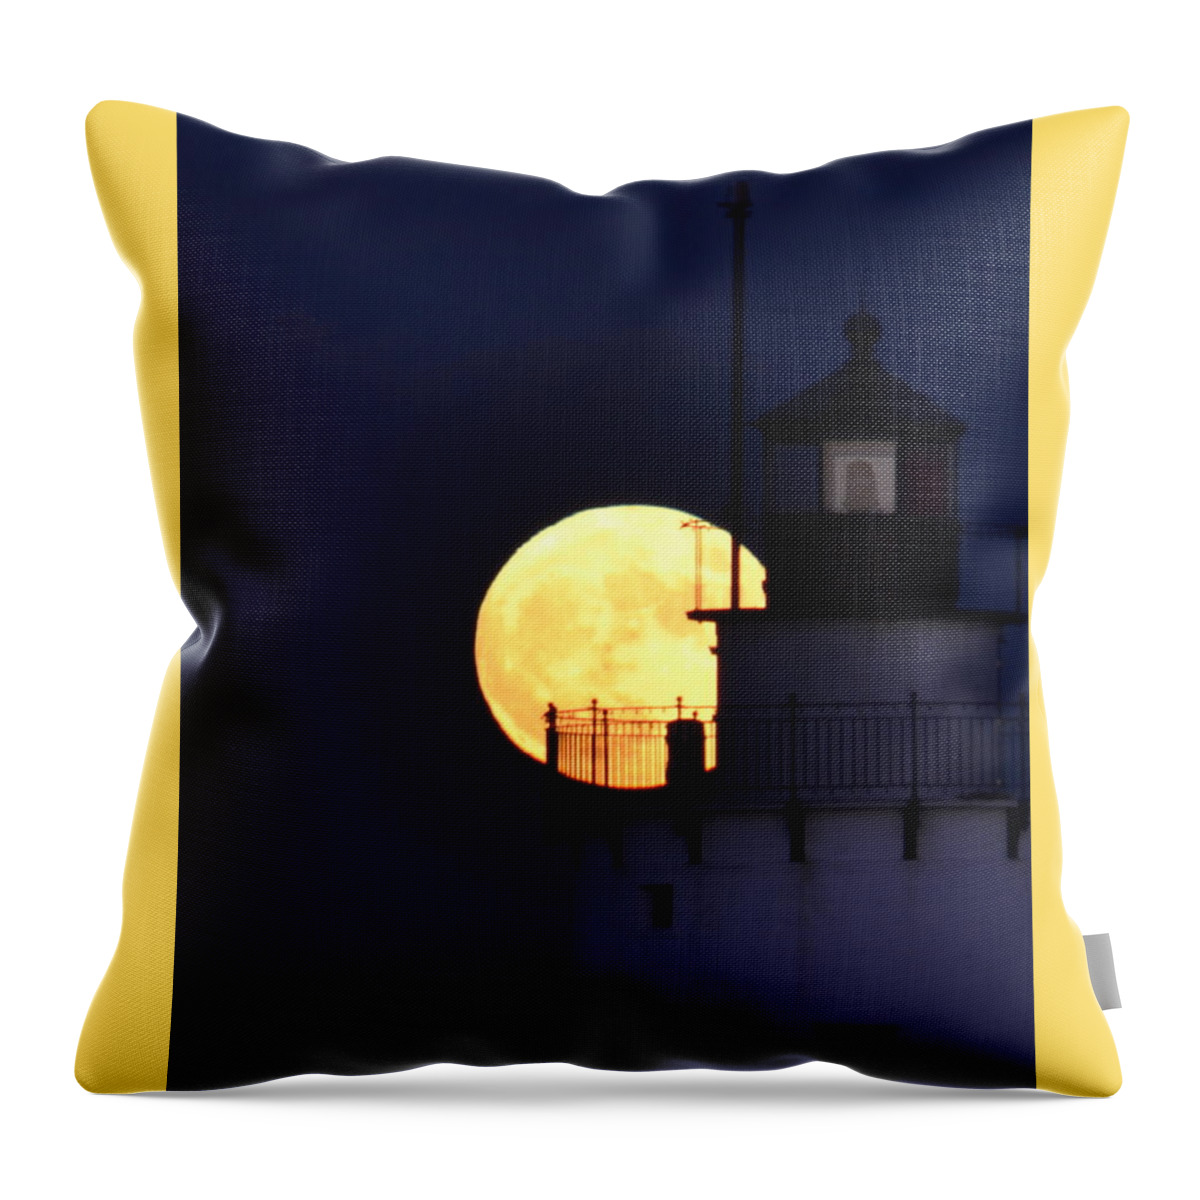 Moon Throw Pillow featuring the photograph Illusion by Colleen Phaedra